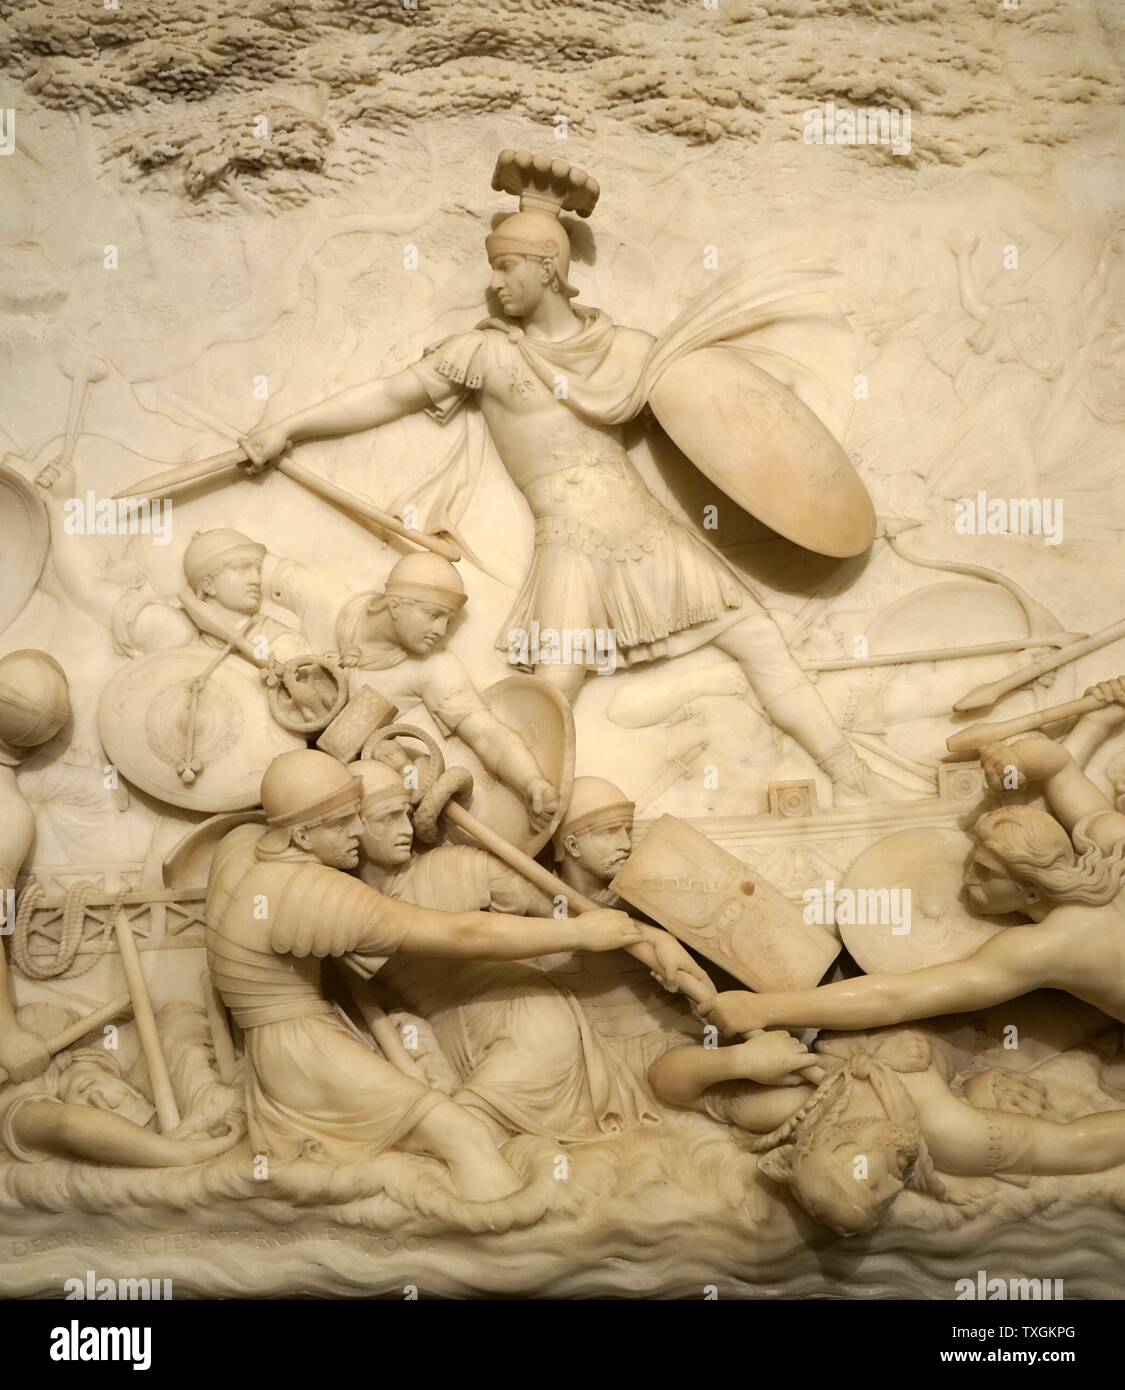 Marble relief depicting Julius Caesar invading Britain by John Deare (1759-1798) a British neo-classical sculptor. Dated 18th Century Stock Photo